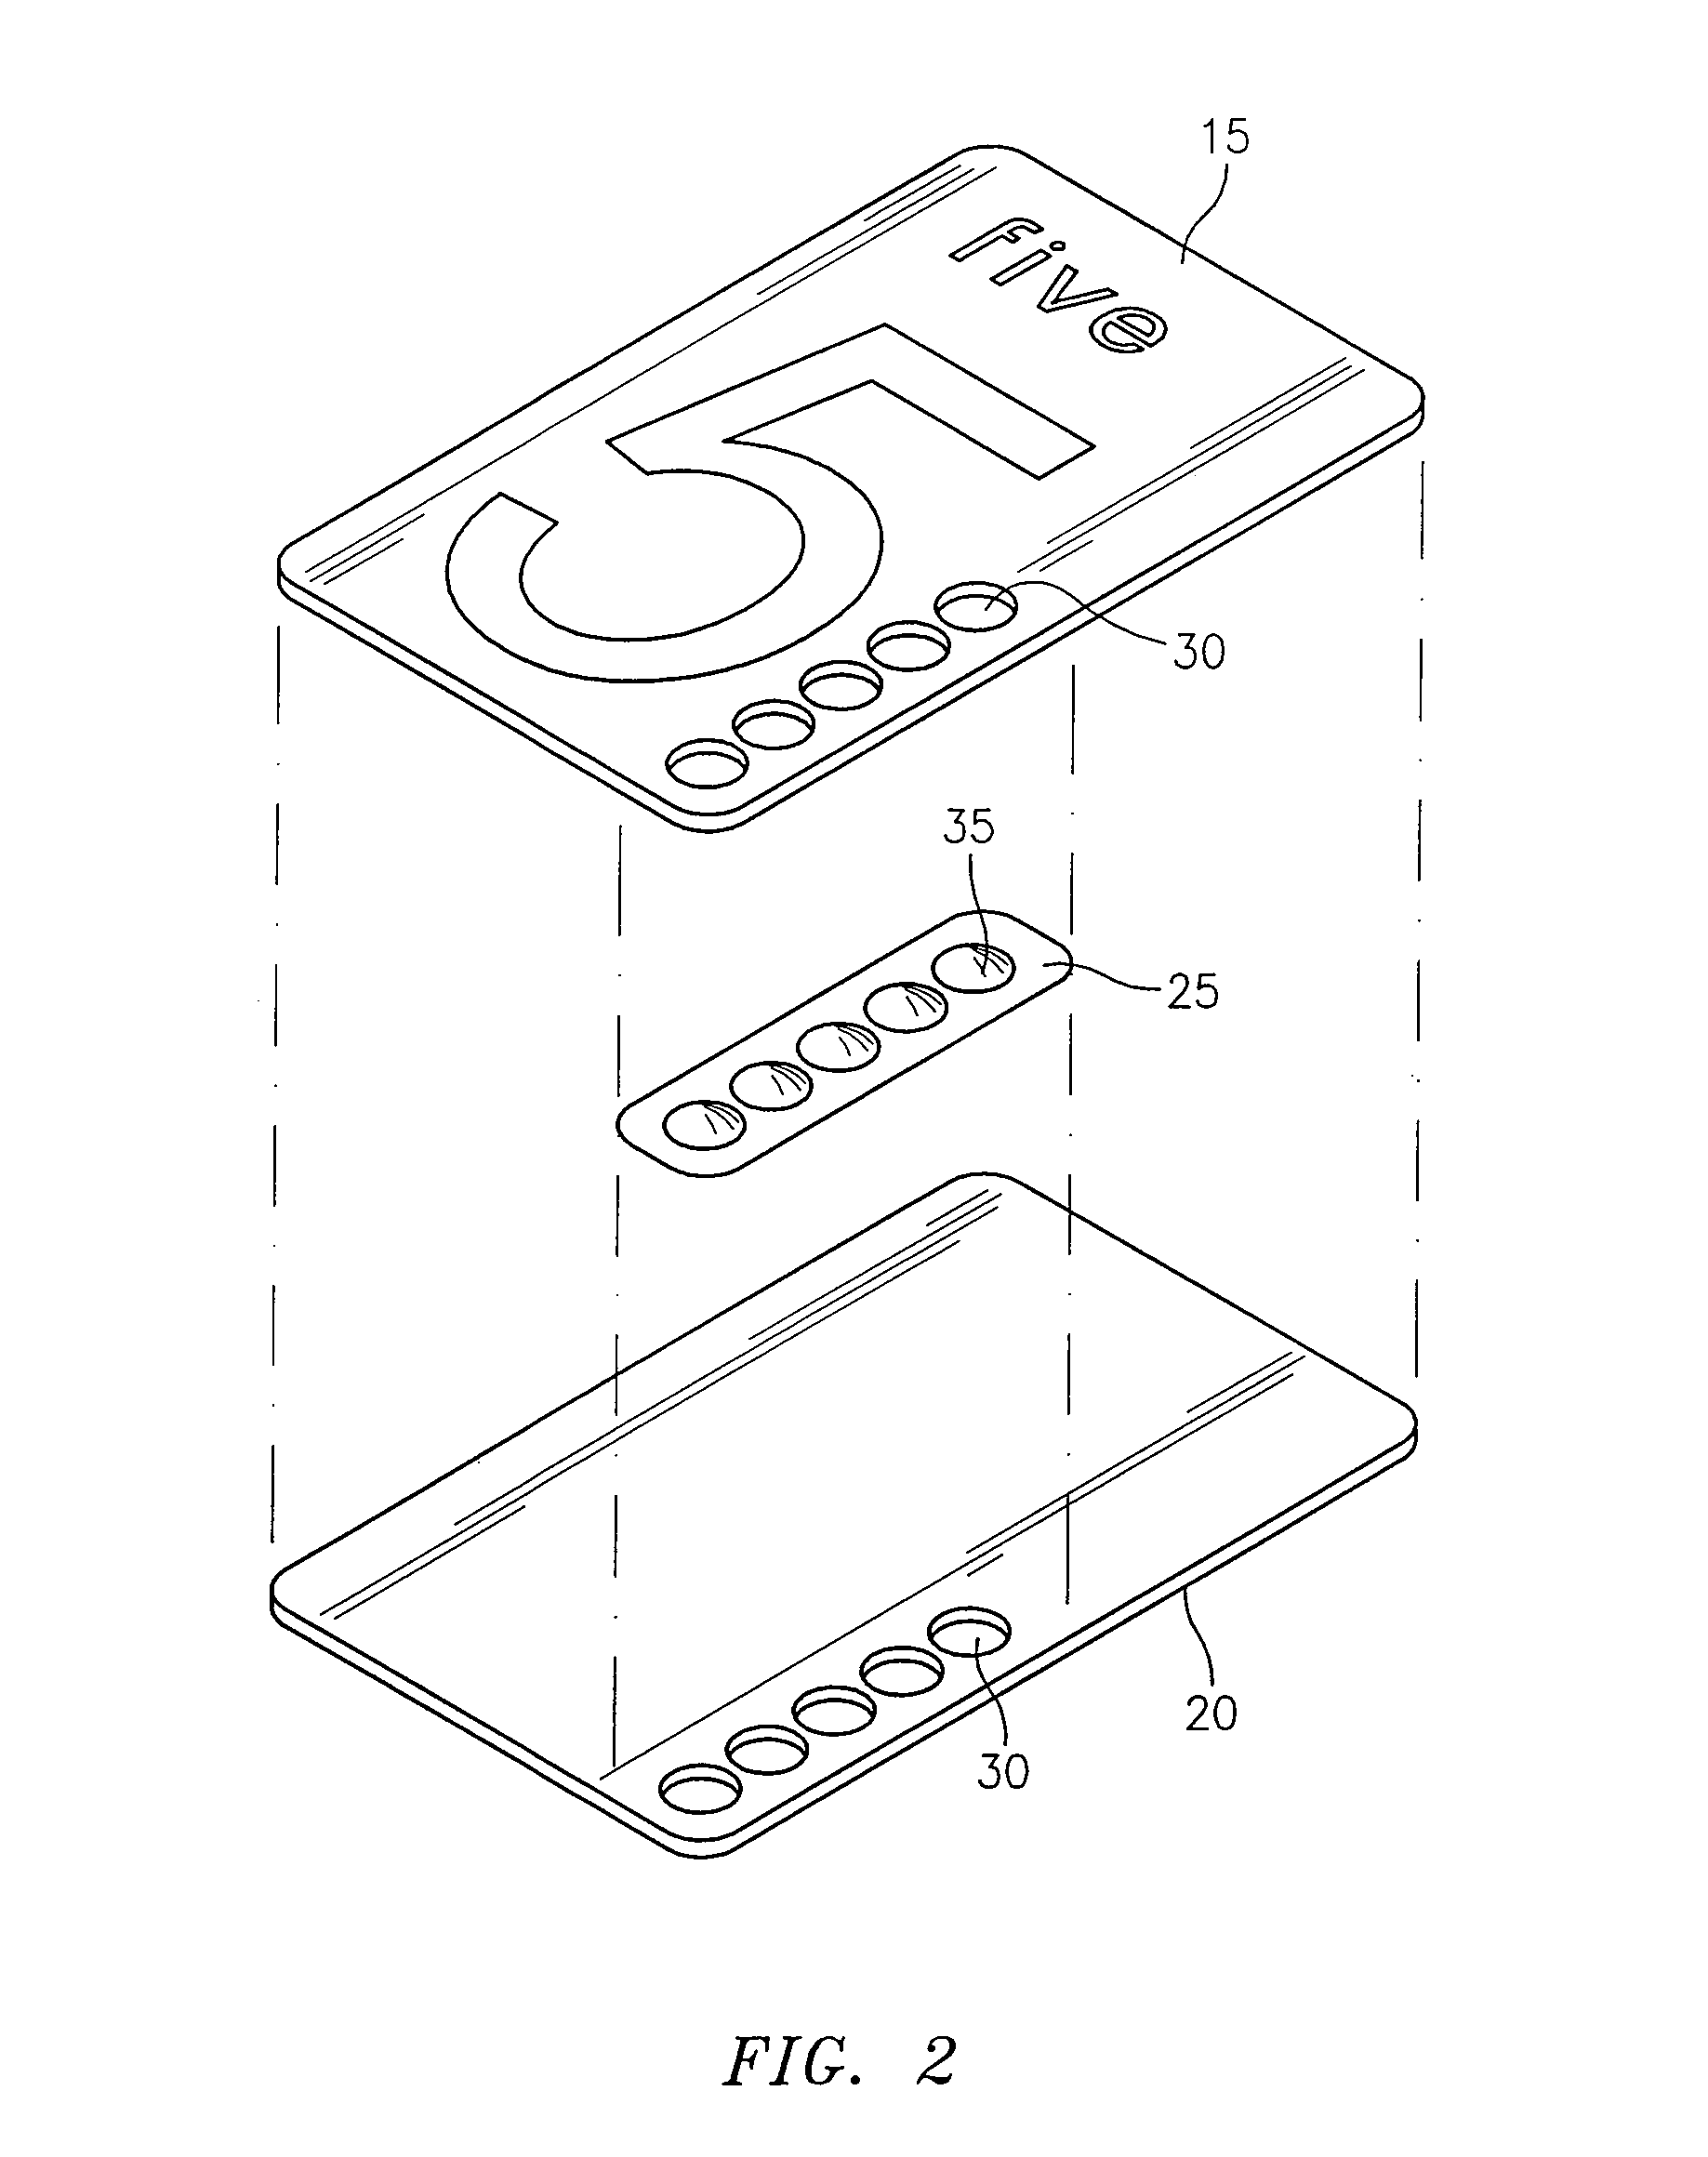 Devices with push button-type mechanism and methods for using said devices